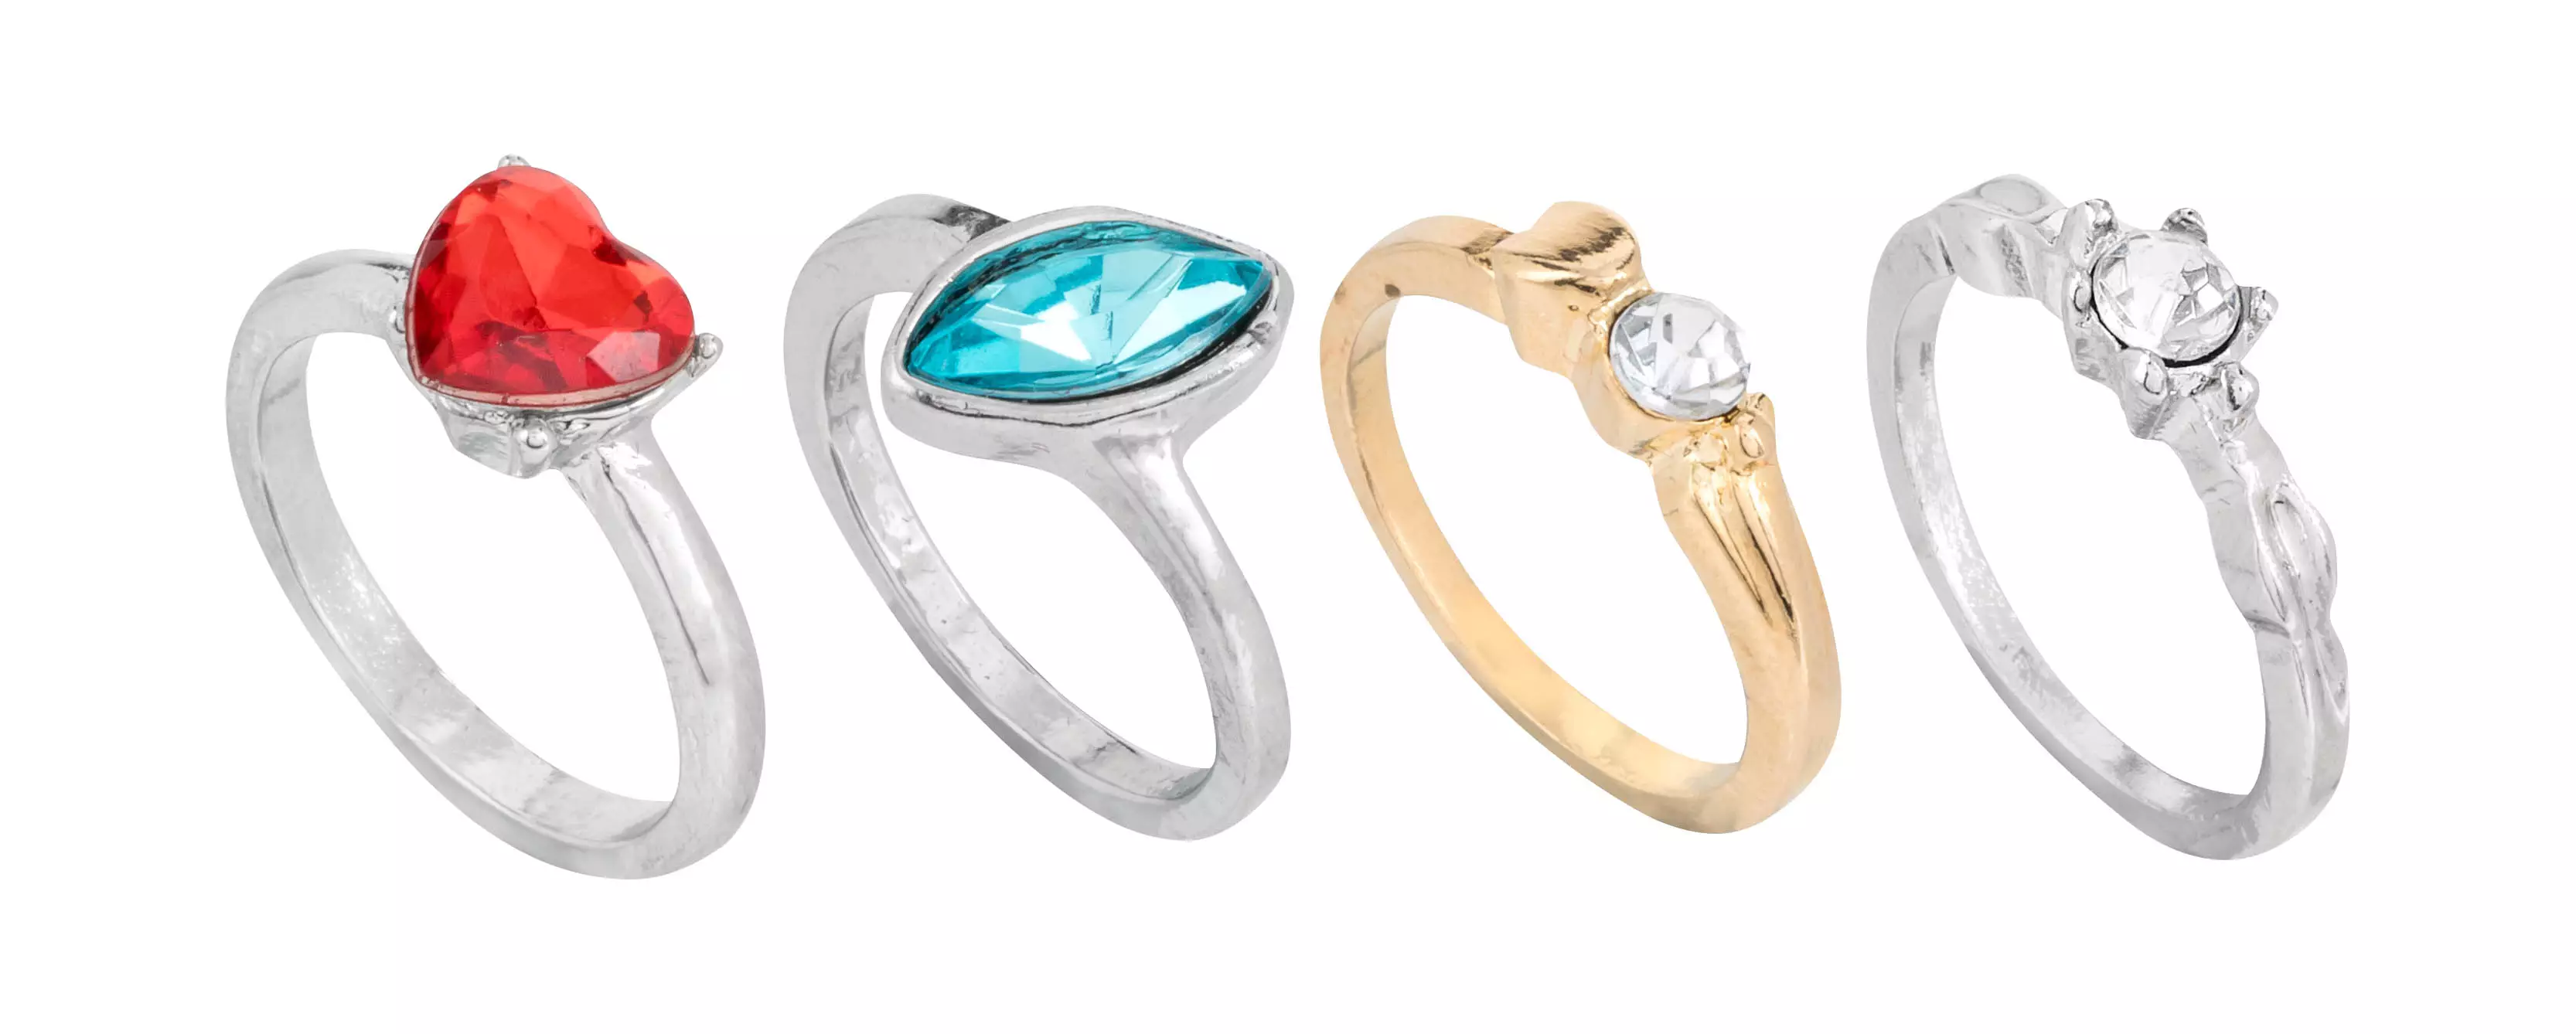 The Valentine's rings come in a range of styles.